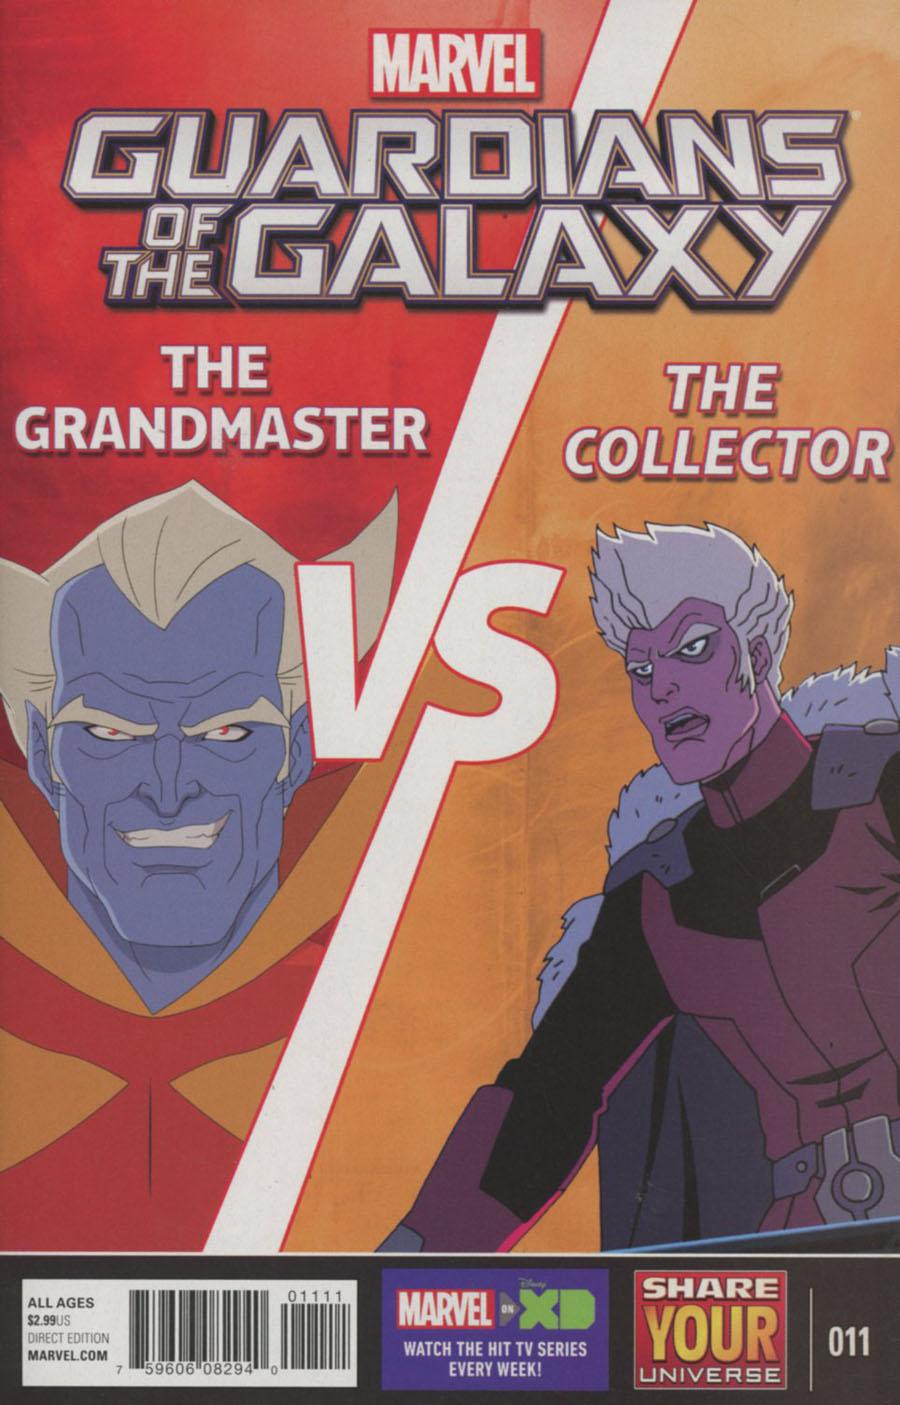 Marvel Universe Guardians of the Galaxy Vol. 2 #11